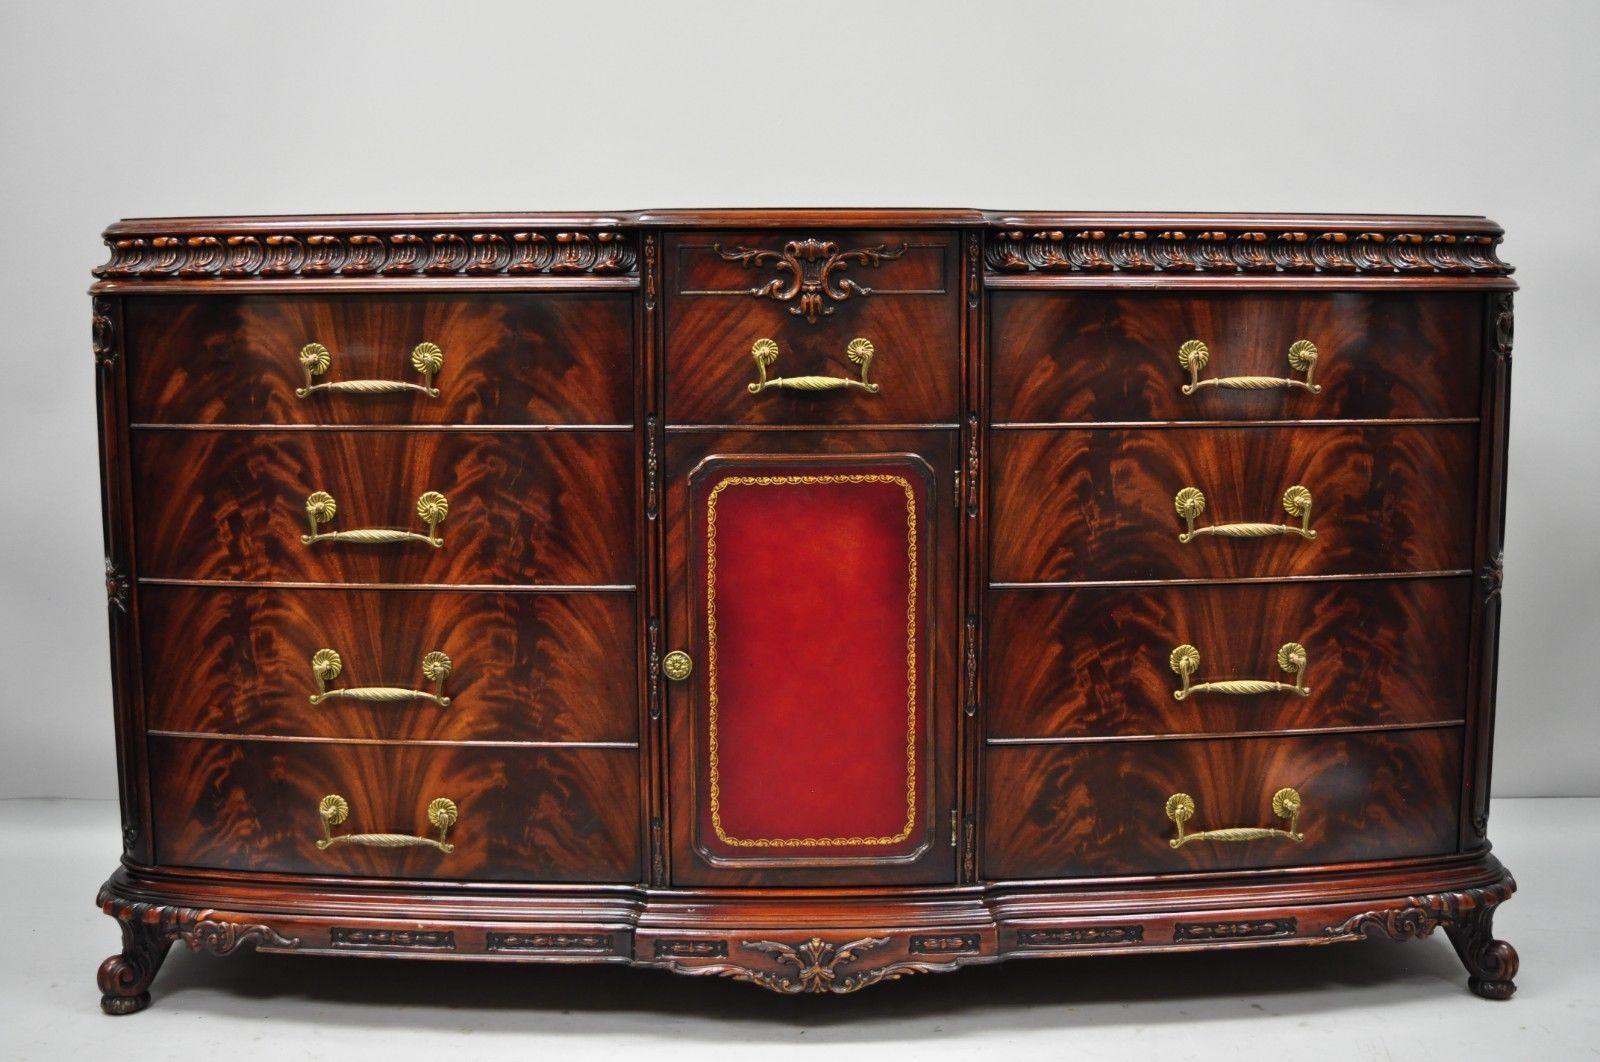 Chinese Chippendale flame mahogany triple dresser chest and mirror Detroit Furniture. Item ism made by Detroit Furniture Company of Brooklyn, NY, and features a center with red leather panel, beautiful flamed wood grain, ornately carved details, 12